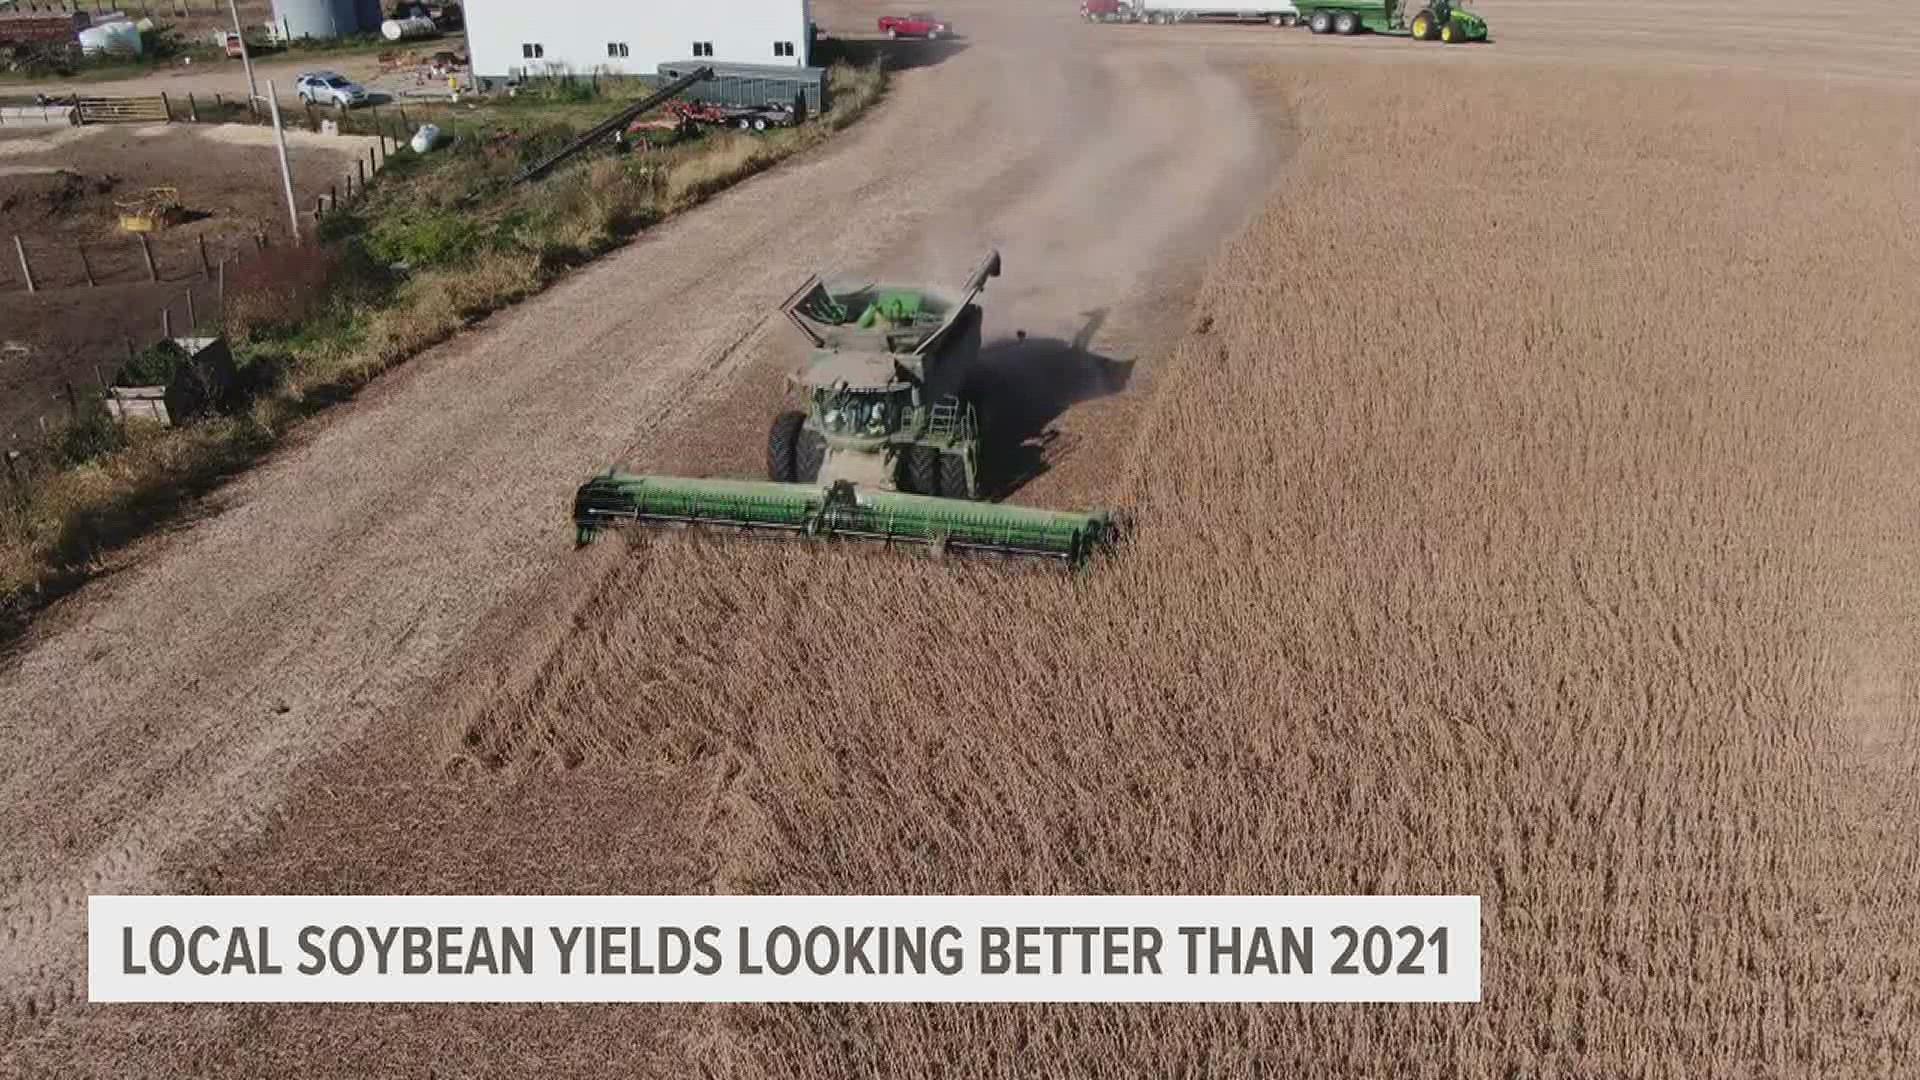 Around the QCA, dry conditions are creating an ideal harvest for soybean farmers. For some, this year's yields could be 10% greater than in 2021.